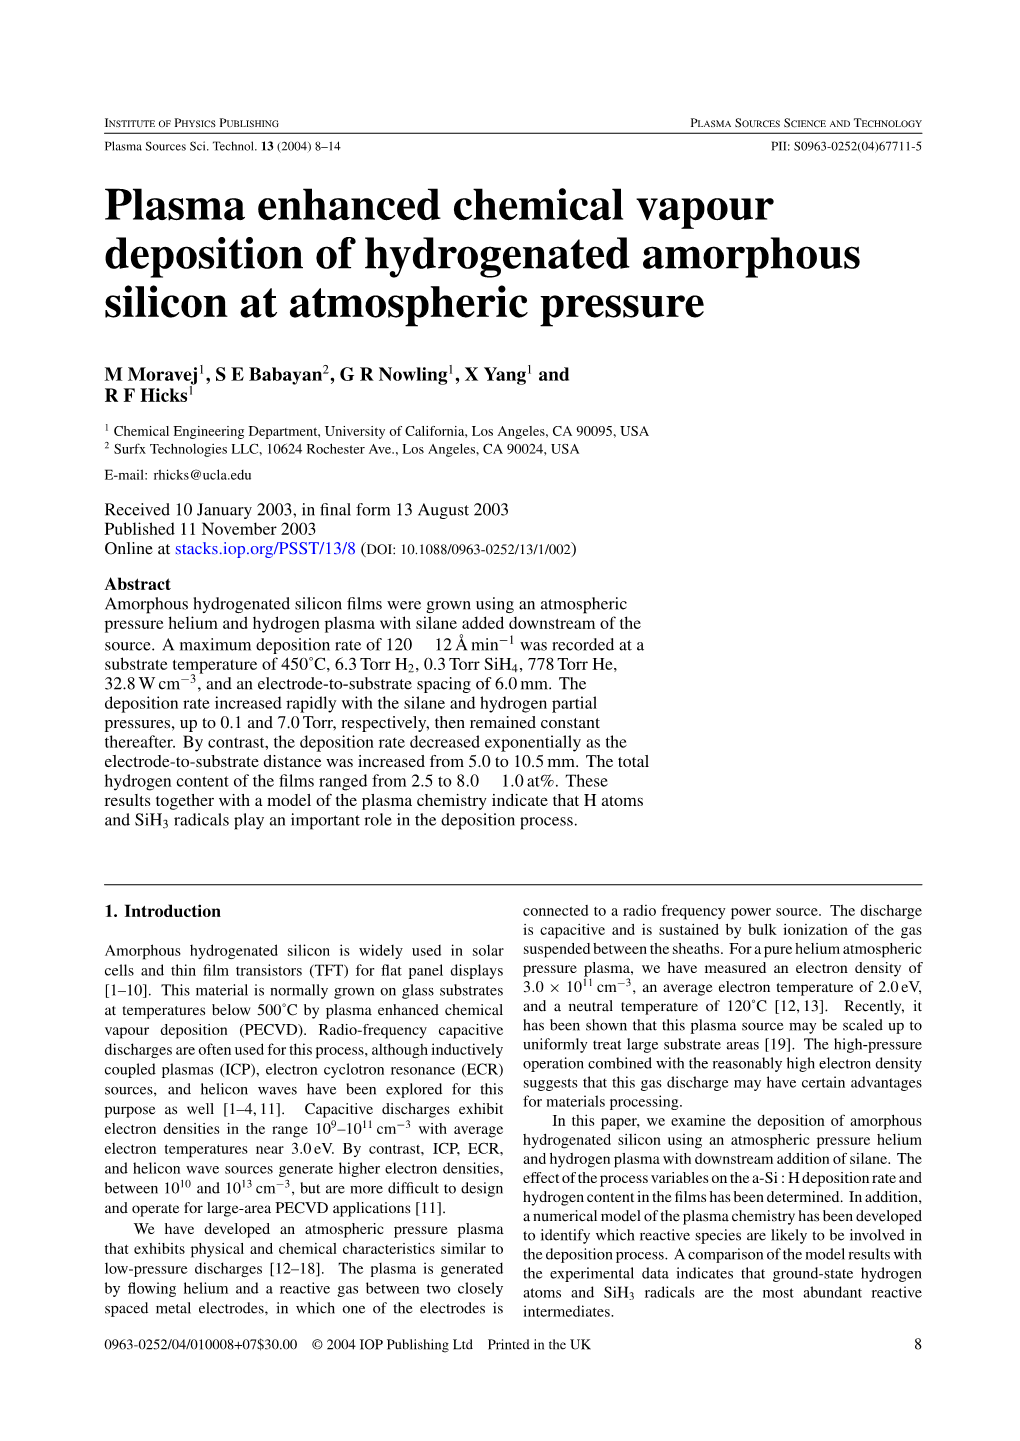 Plasma Enhanced Chemical Vapour Deposition of Hydrogenated Amorphous Silicon at Atmospheric Pressure